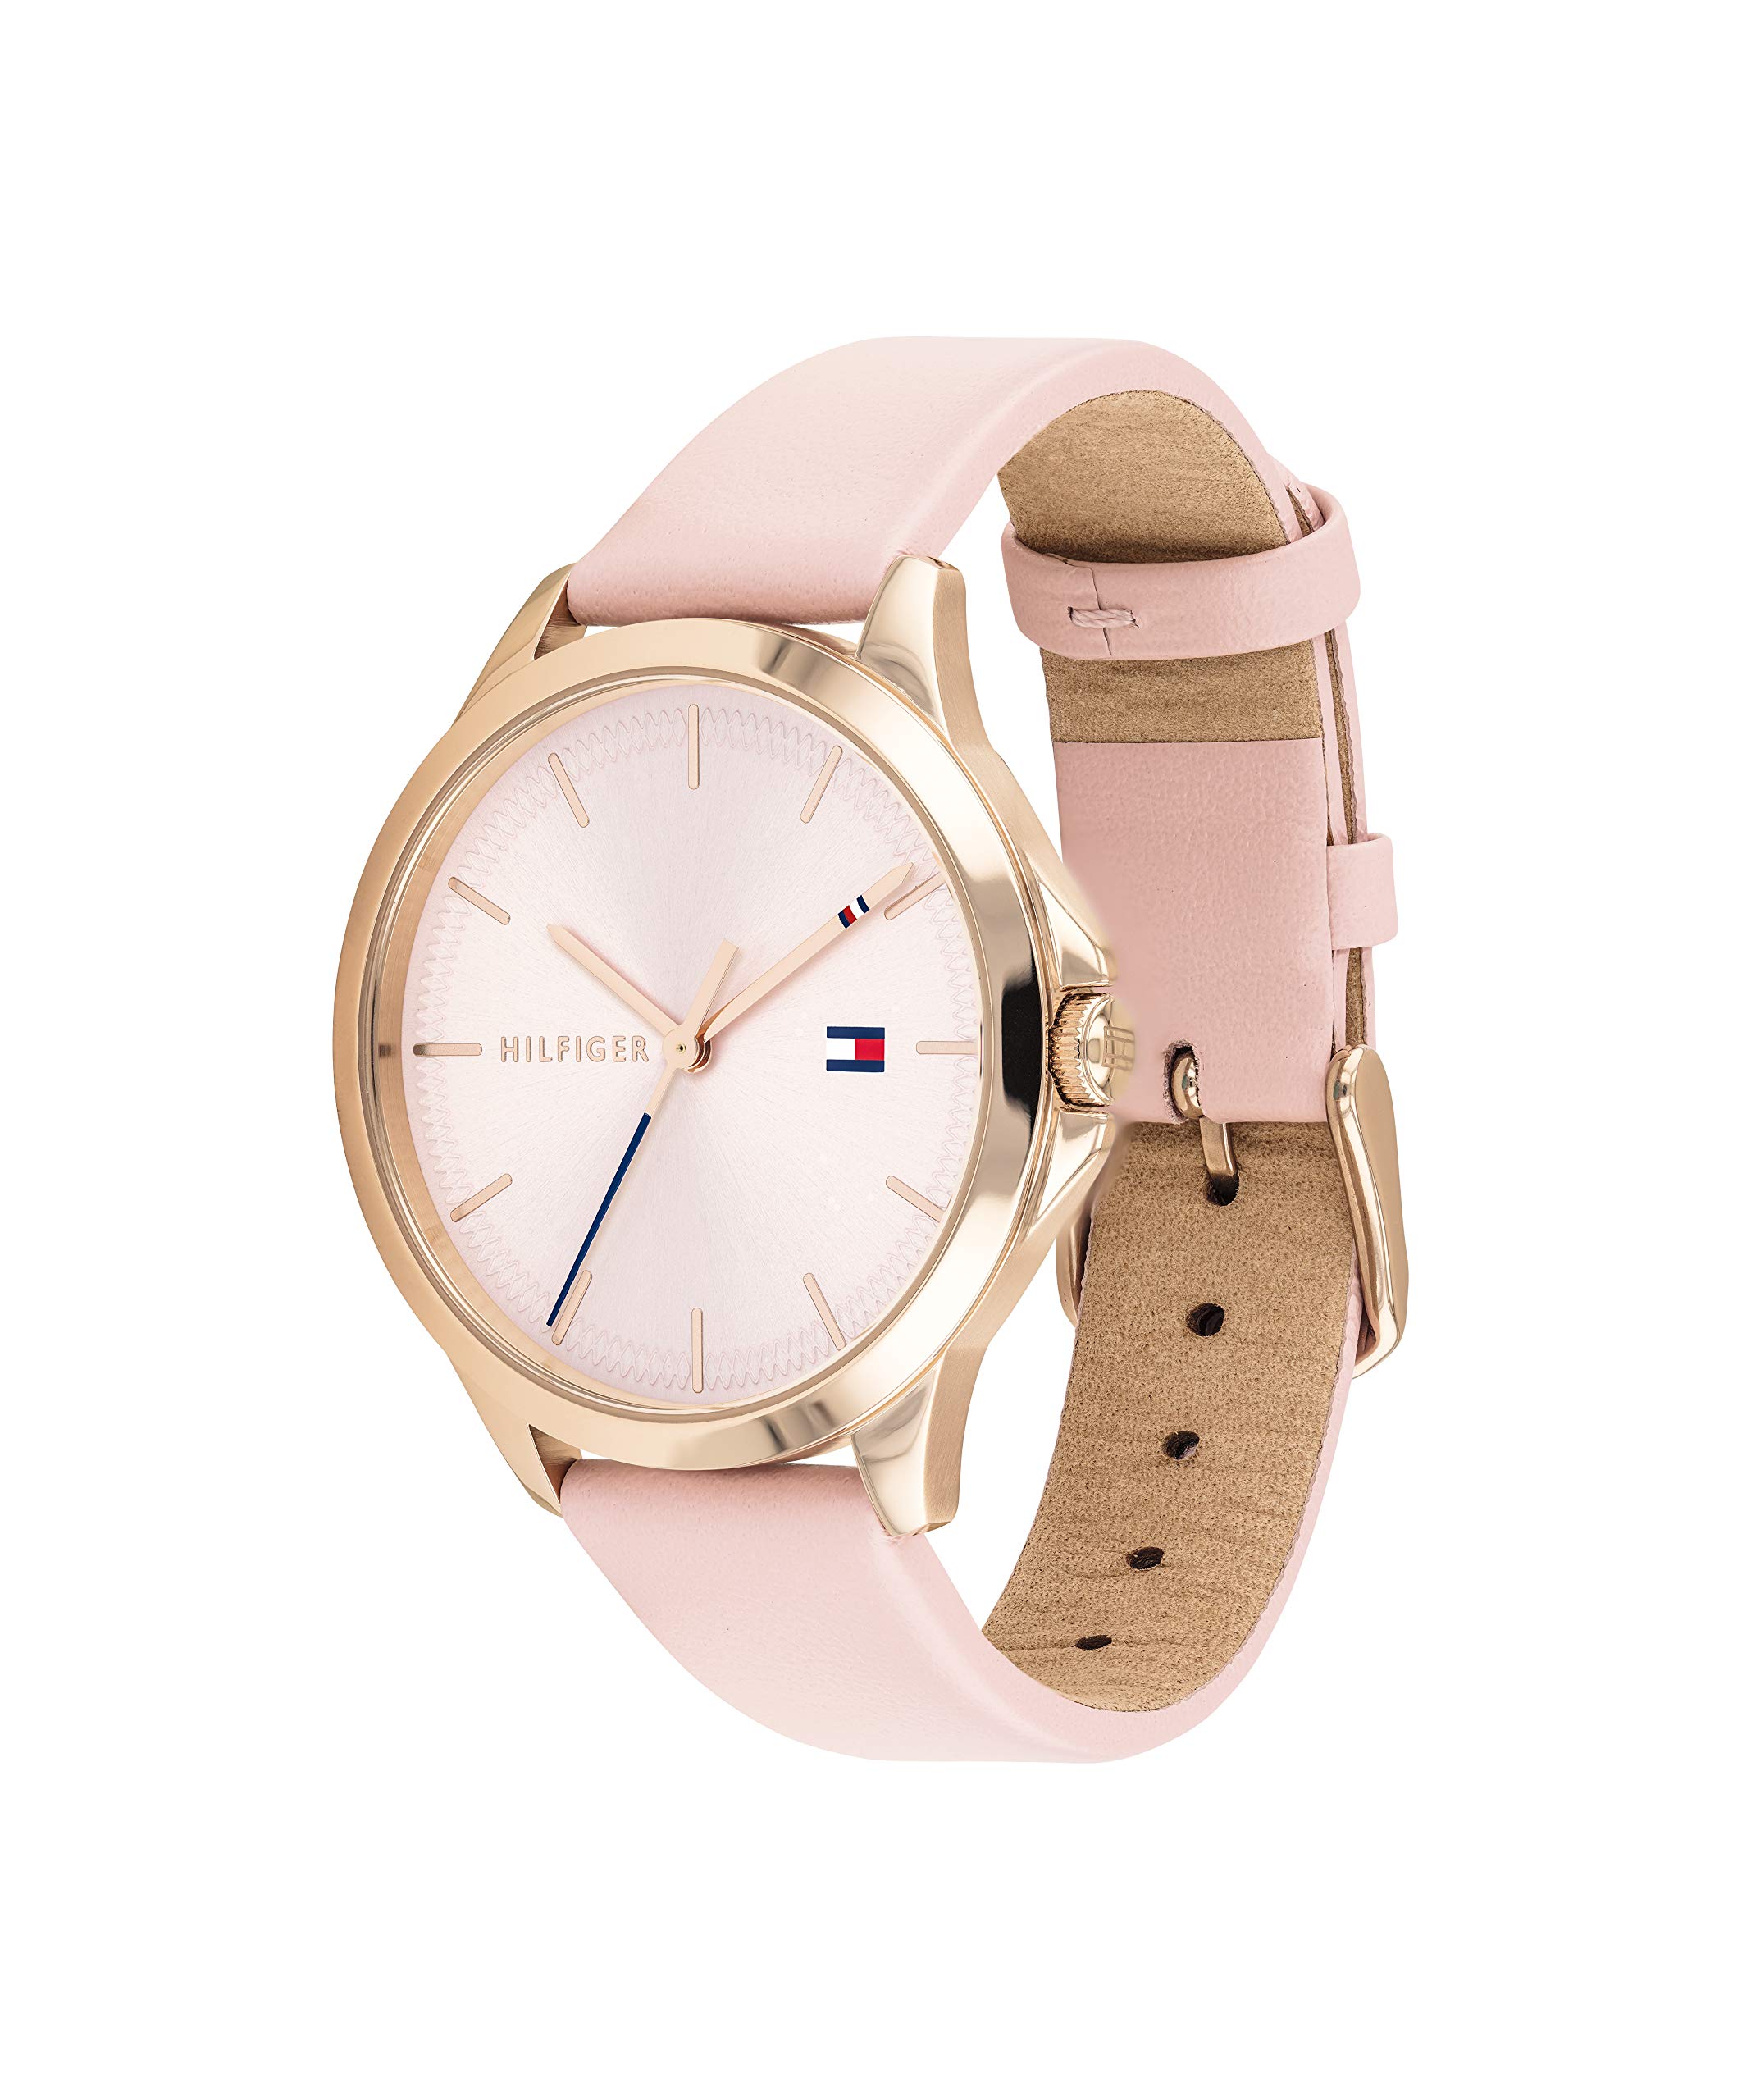 Tommy Hilfiger Women's Stainless Steel Quartz Watch with Leather Calfskin Strap, Pink, 17 (Model: 1782090)